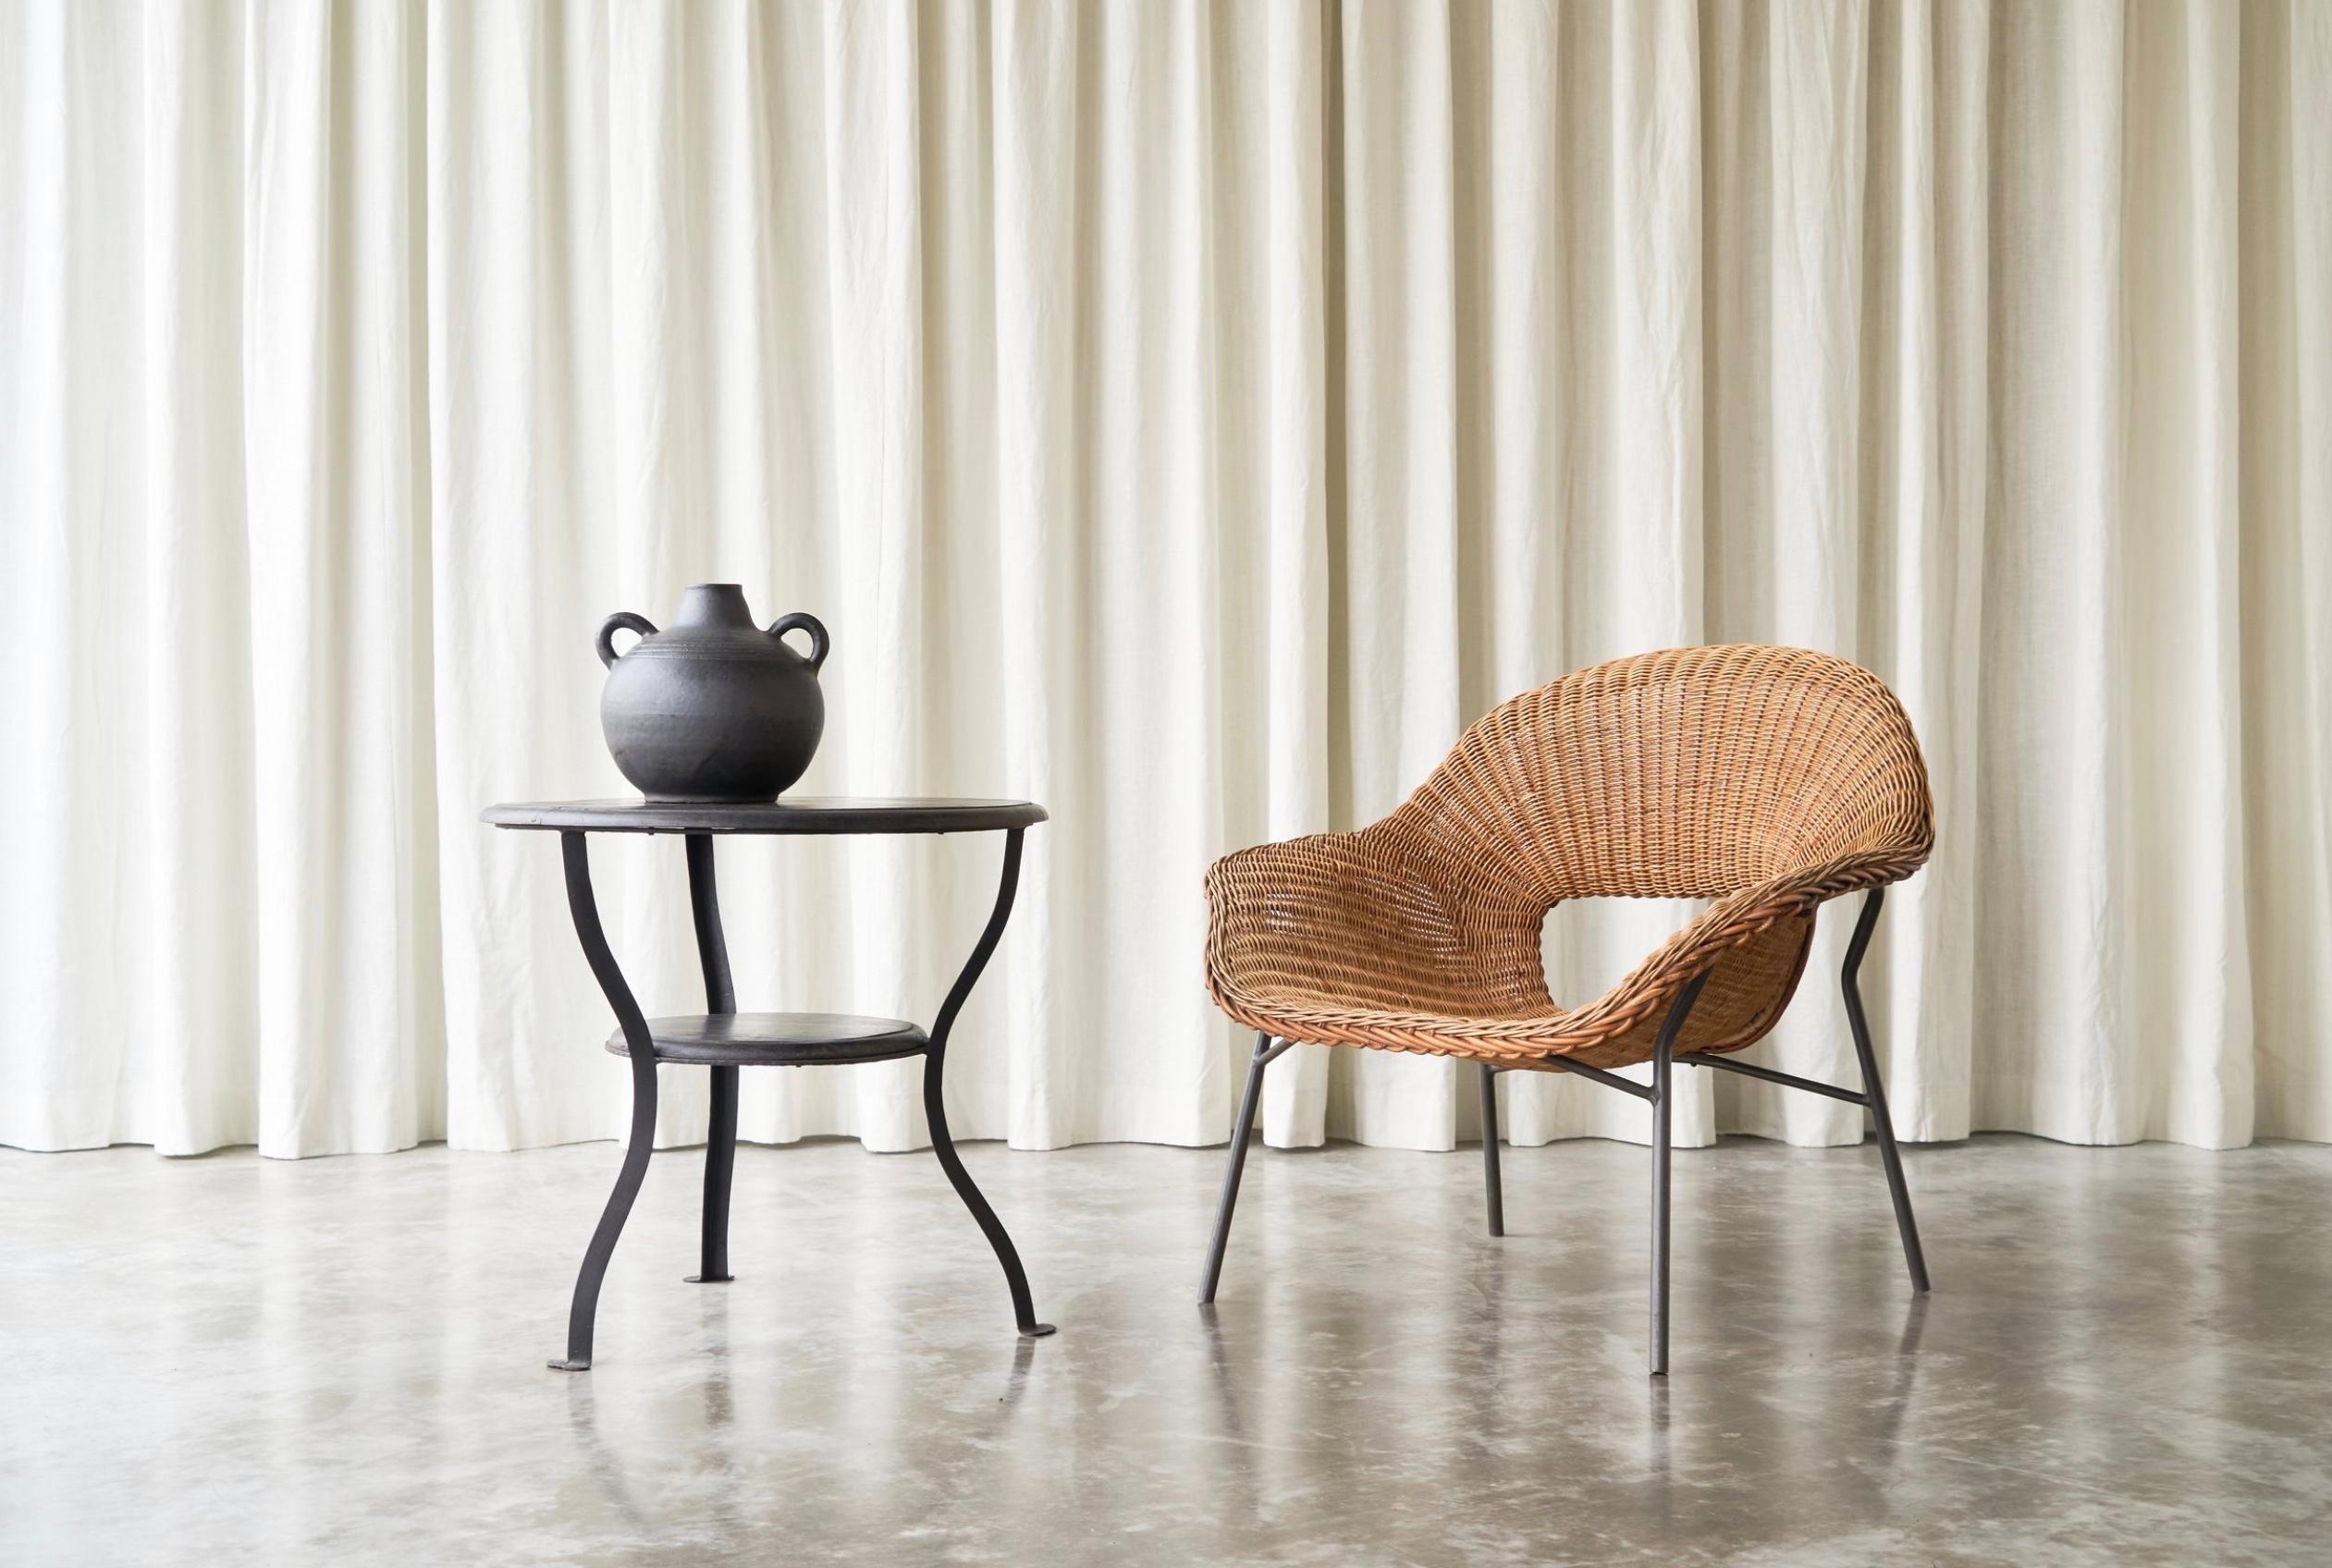 Dirk van Sliedregt Easy Chair in Rattan and Metal, The Netherlands, 1960s.

This rattan and metal lounge chair was designed in the 1960s by Dirk Van Sliedregt, for Dutch manufacterer Gebroeders Jonkers. It is a rare model, as it was only made in a